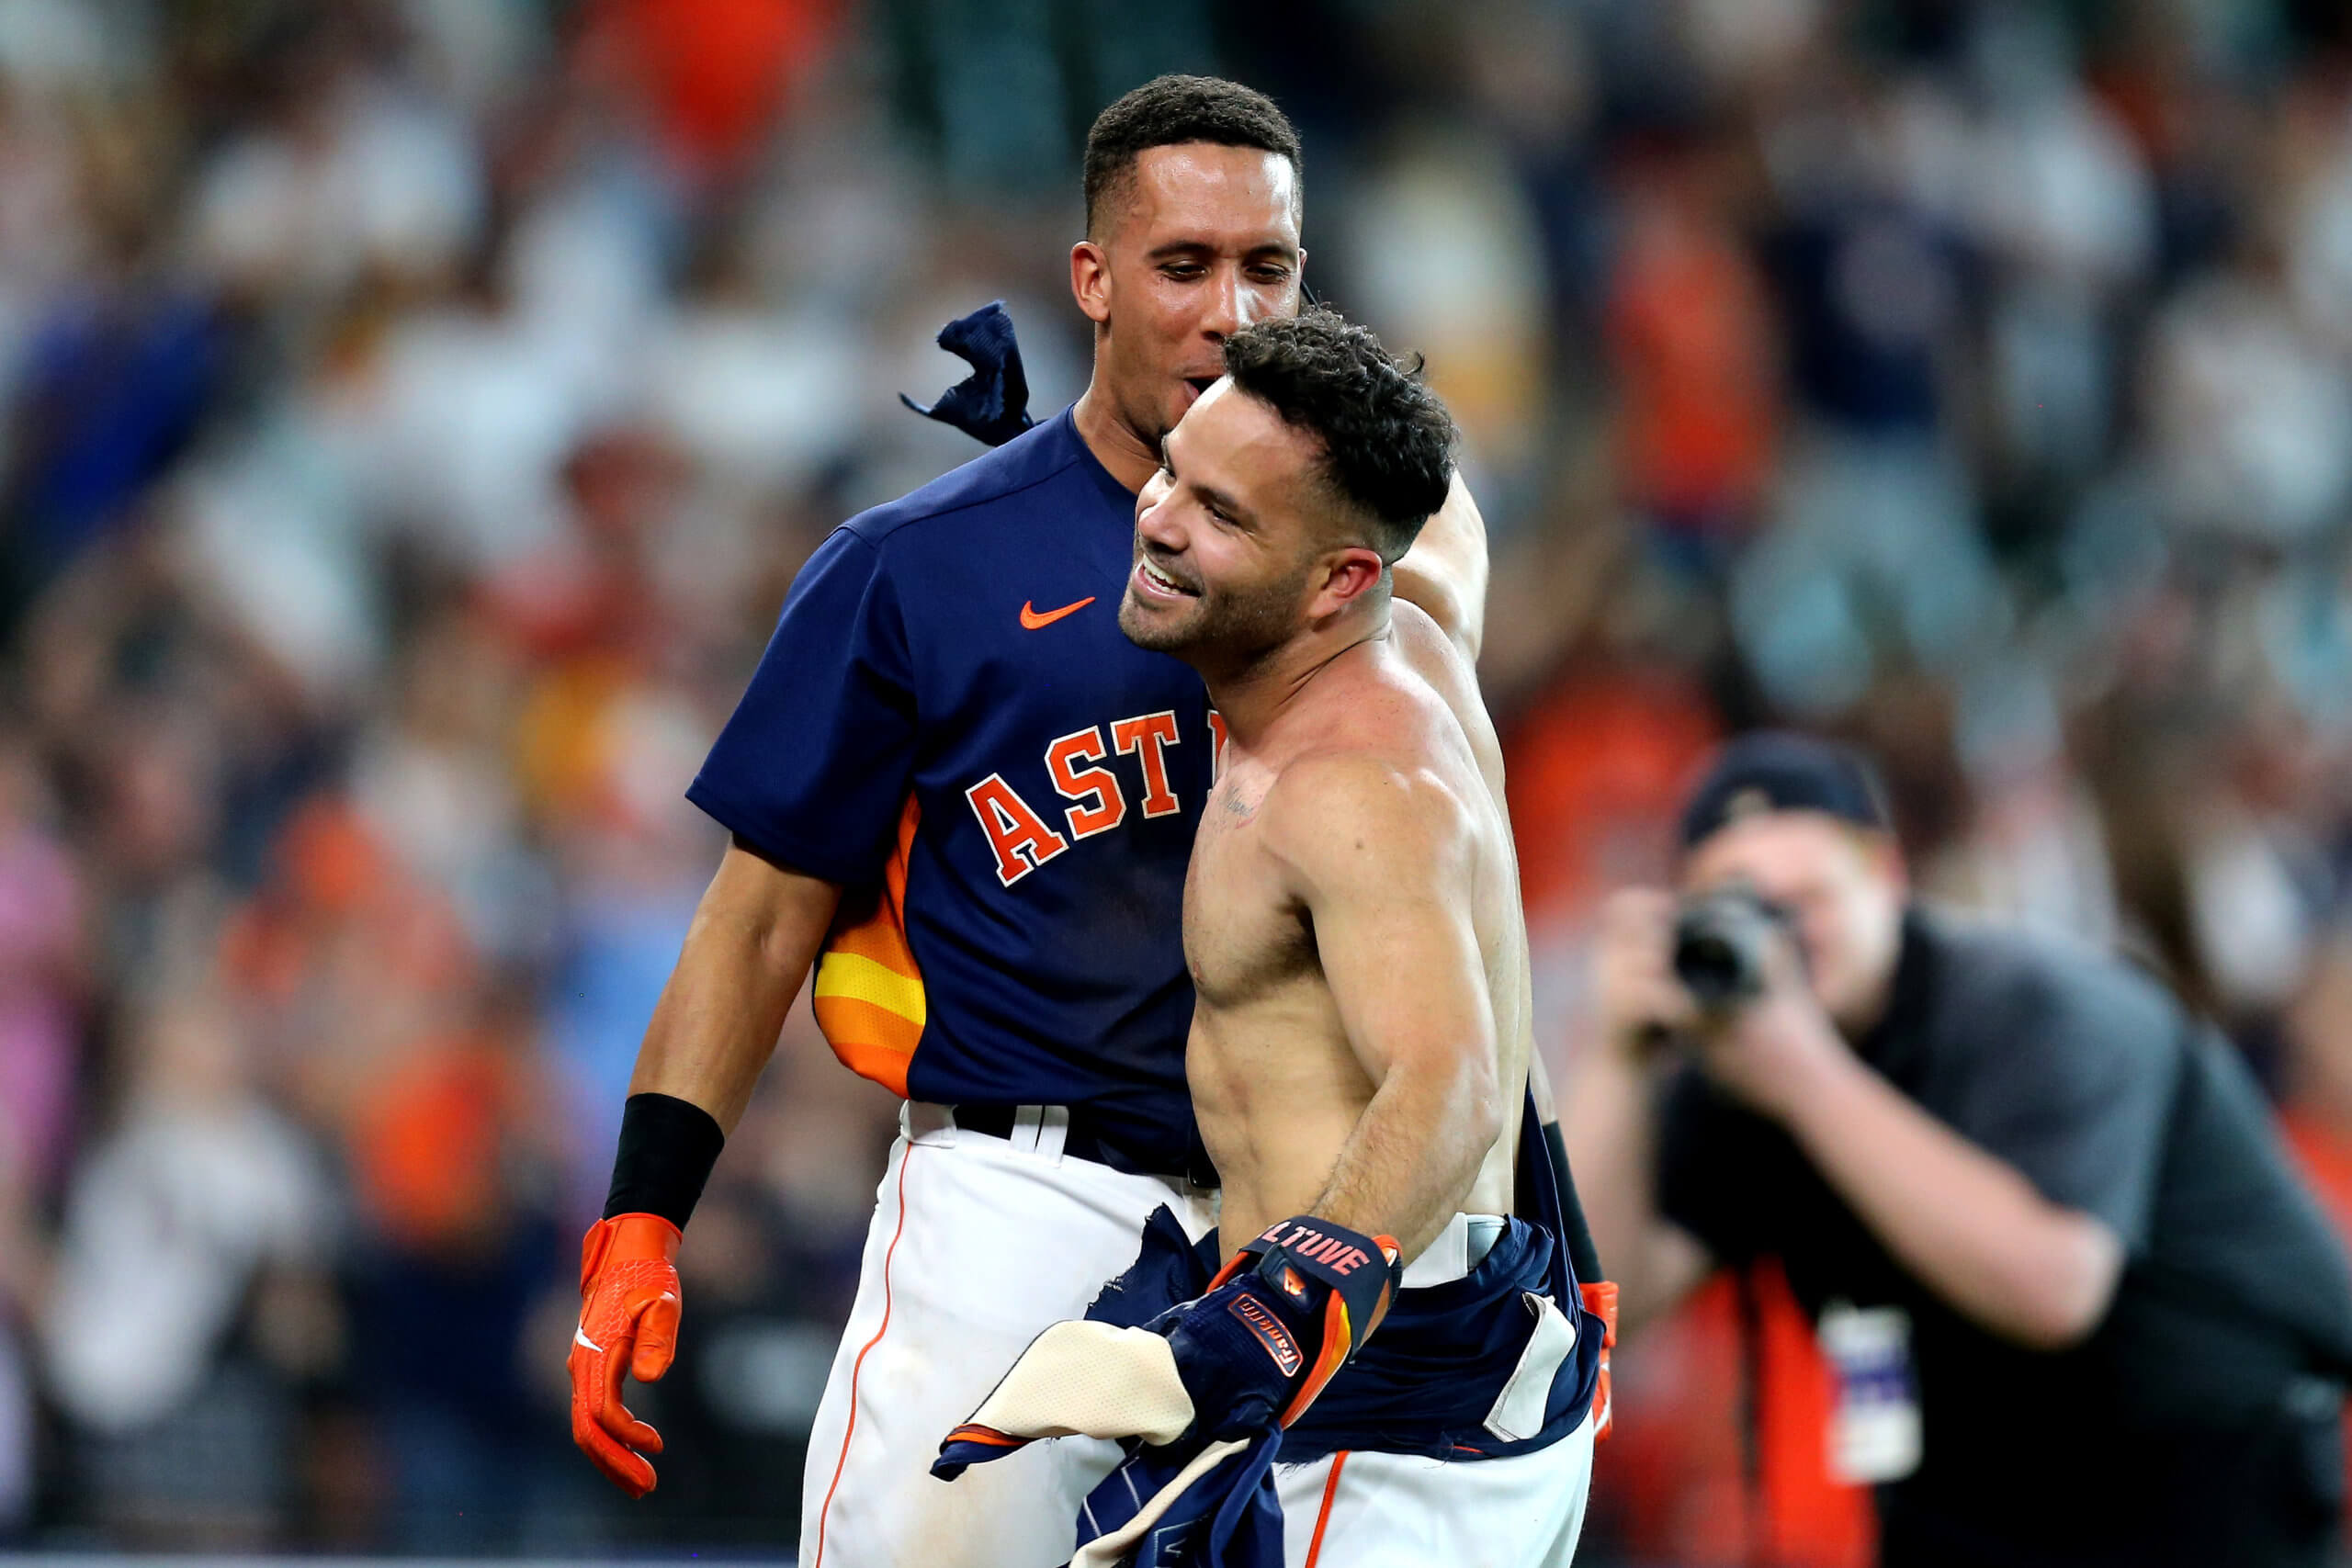 Astros' bats wake up, tripping alarm for Yankees - Newsday